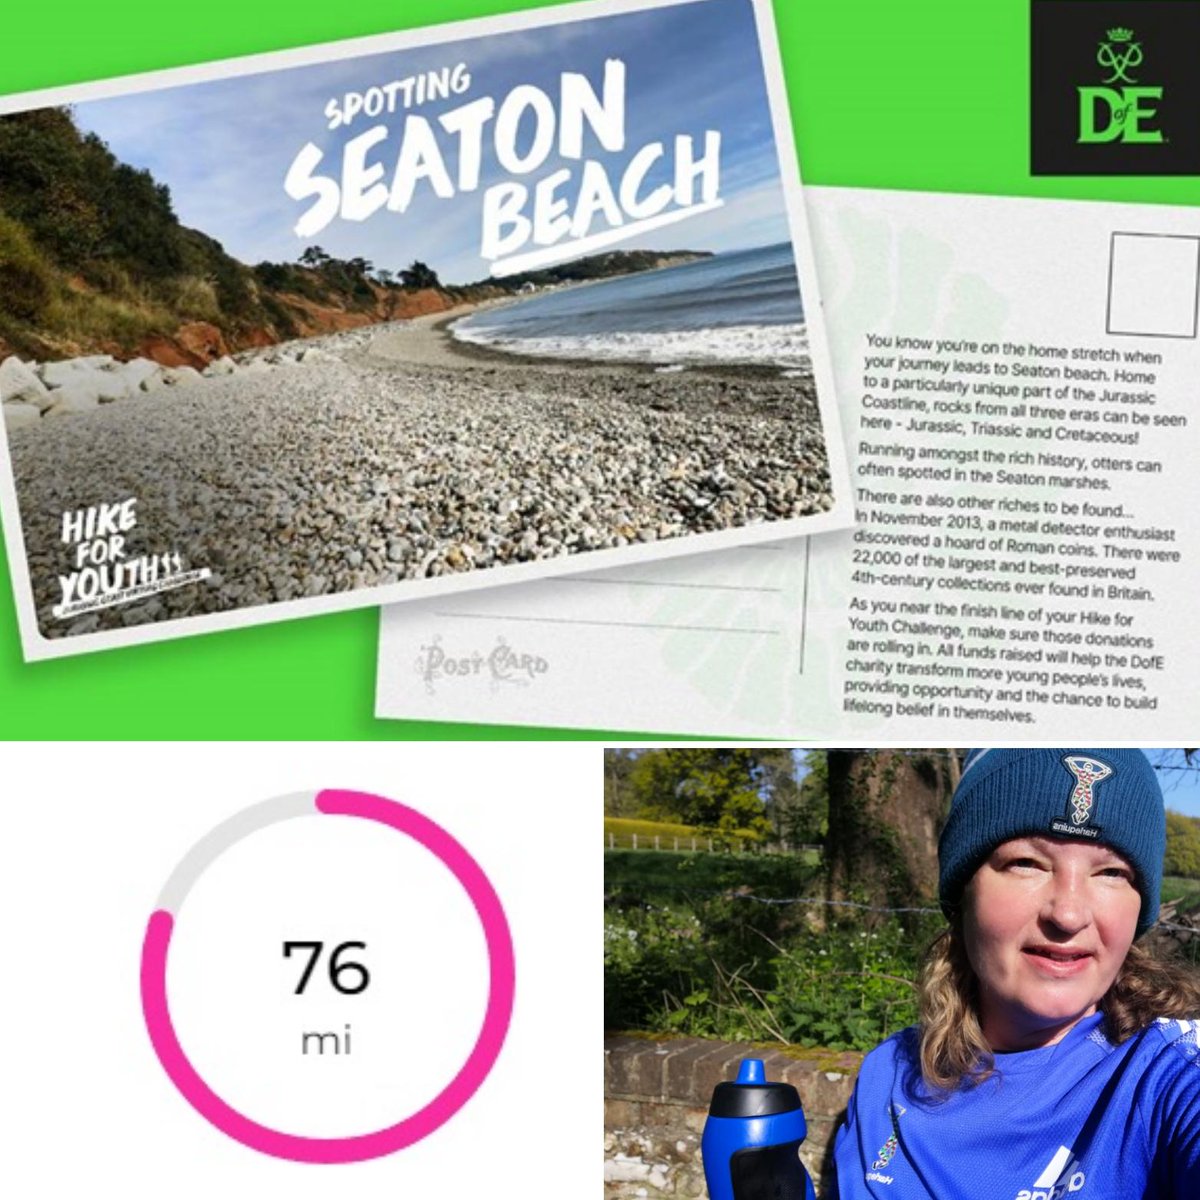 I've just got my 3rd postcard from my virtual challenge to #HikeForYouth having gone by Seaton Beach (75 miles) A sign I'm on the home stretch! 😁🏖 I'm writing a small blog which you can read here: bit.ly/3J2kILy Thank you for your support😘#RunningWithoutLimits @DofE